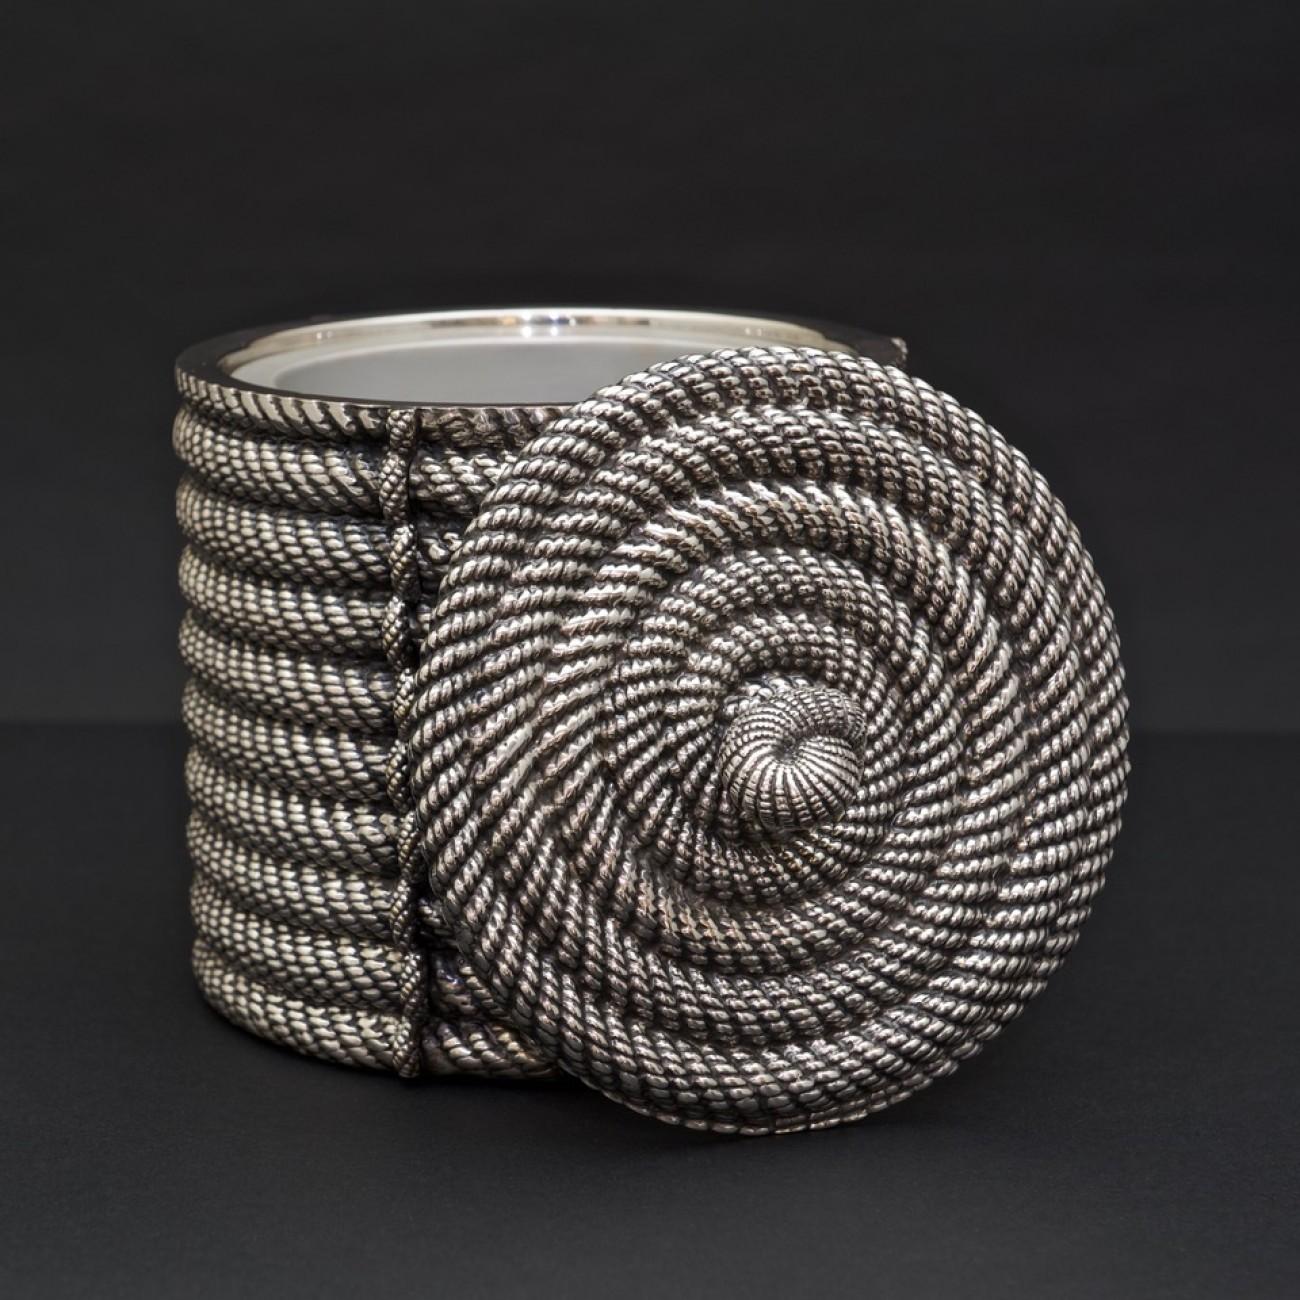 Spanish Coiled Rope Silver Plated Ice Bucket by Valenti, circa 1975